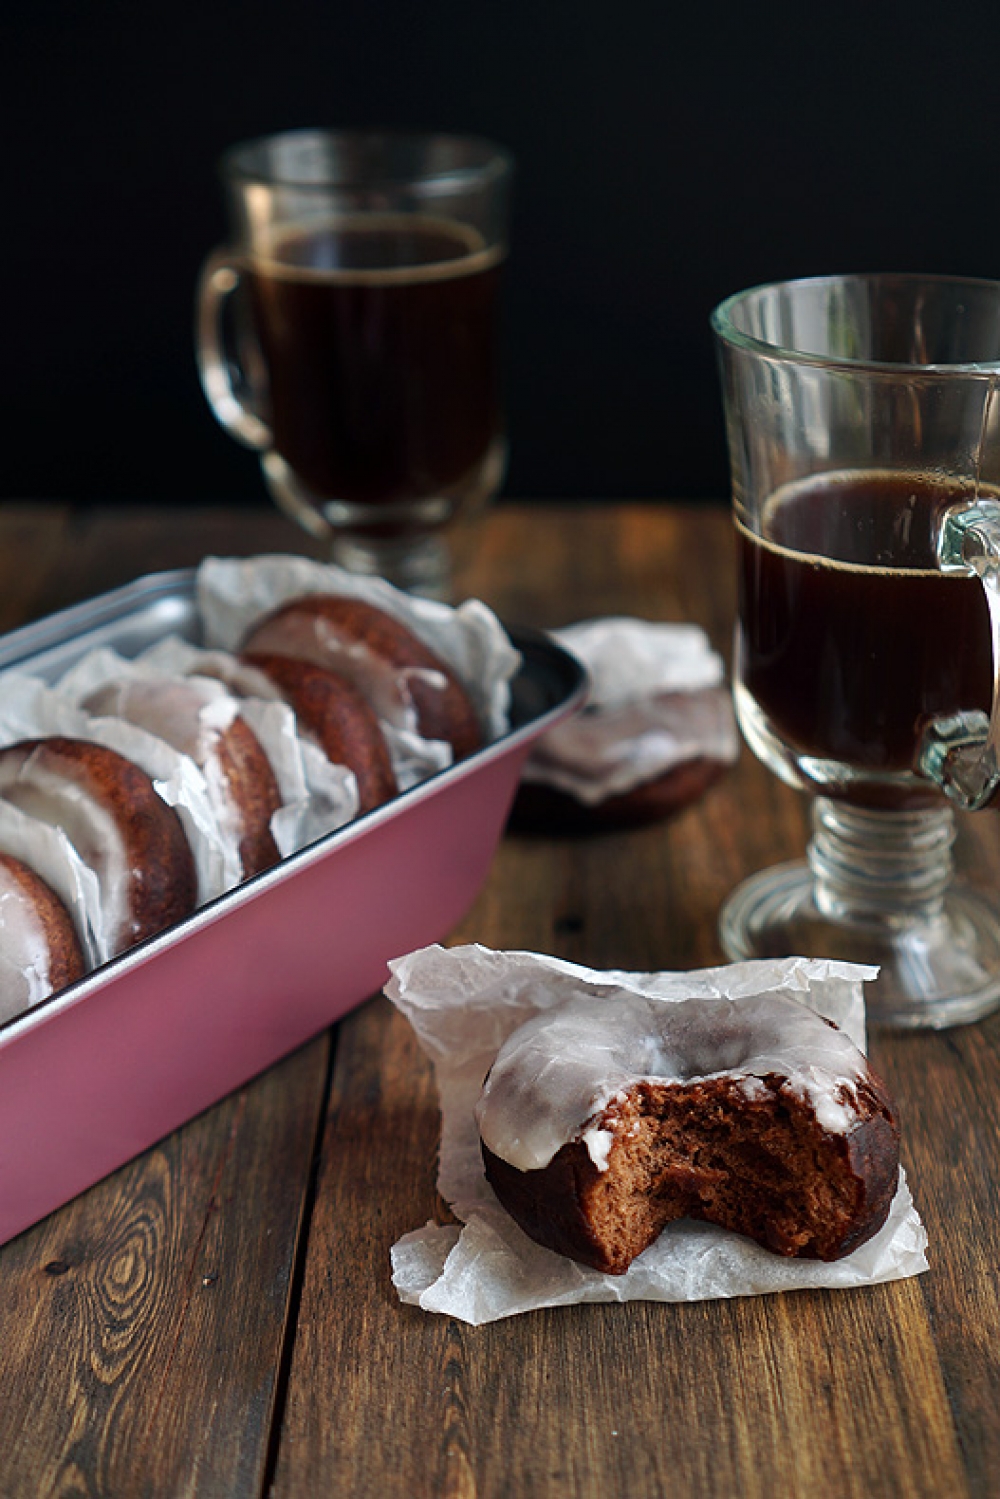 Chocolate donuts that will shake the head of anyone